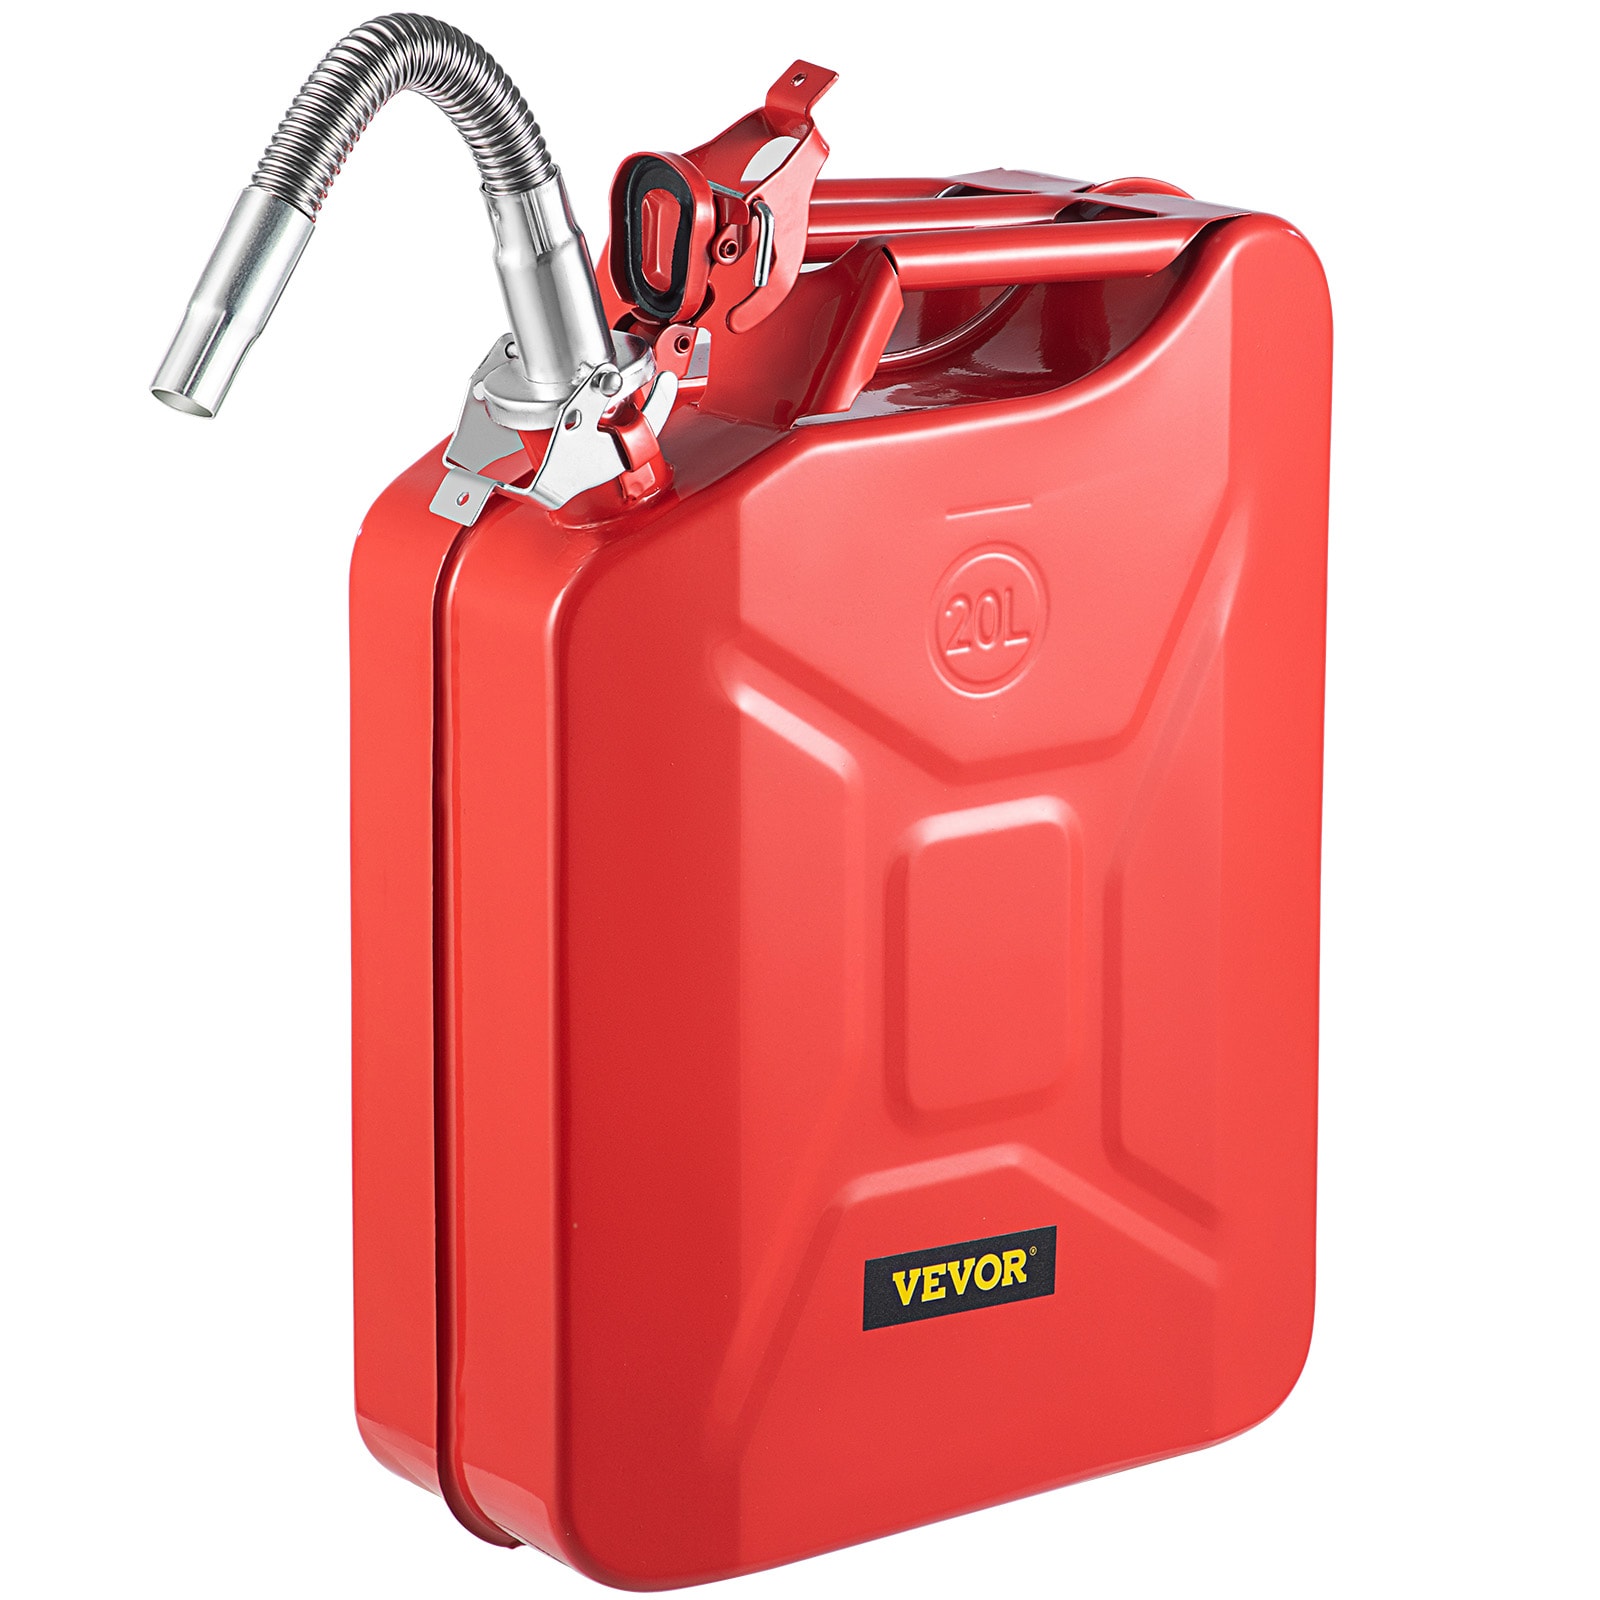 Waste Oil Container - 100-Gallon -Oil-Tainer - Weather Resistant -  Automatic Overflow Shutoff